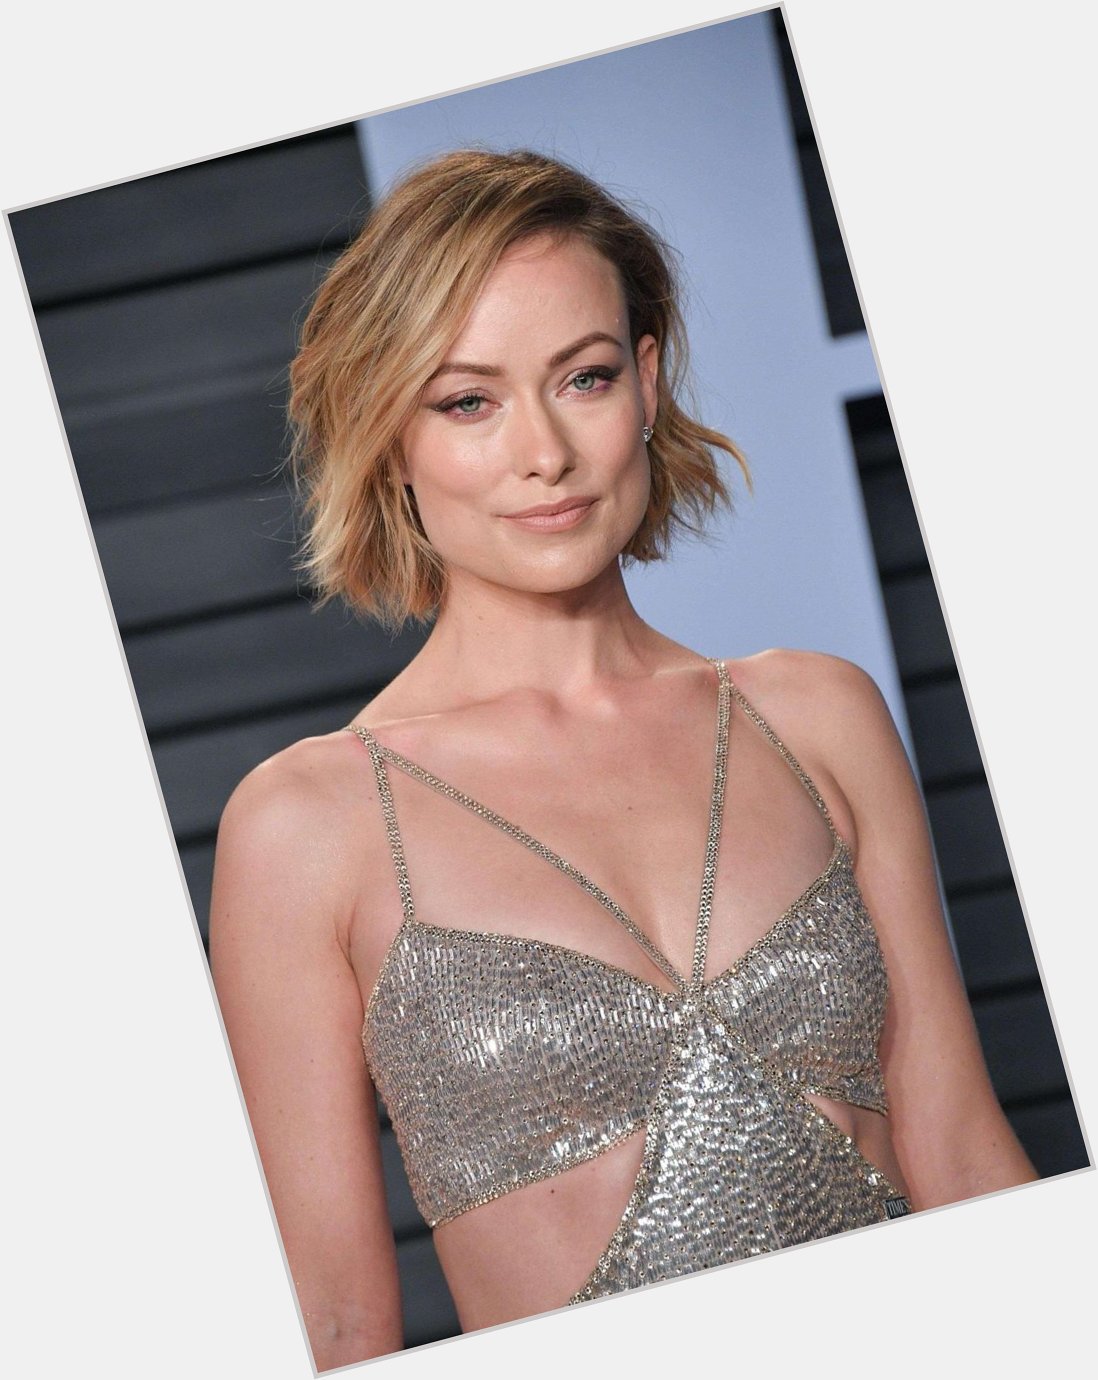 Happy birthday to the talented actress and director, Olivia Wilde! 